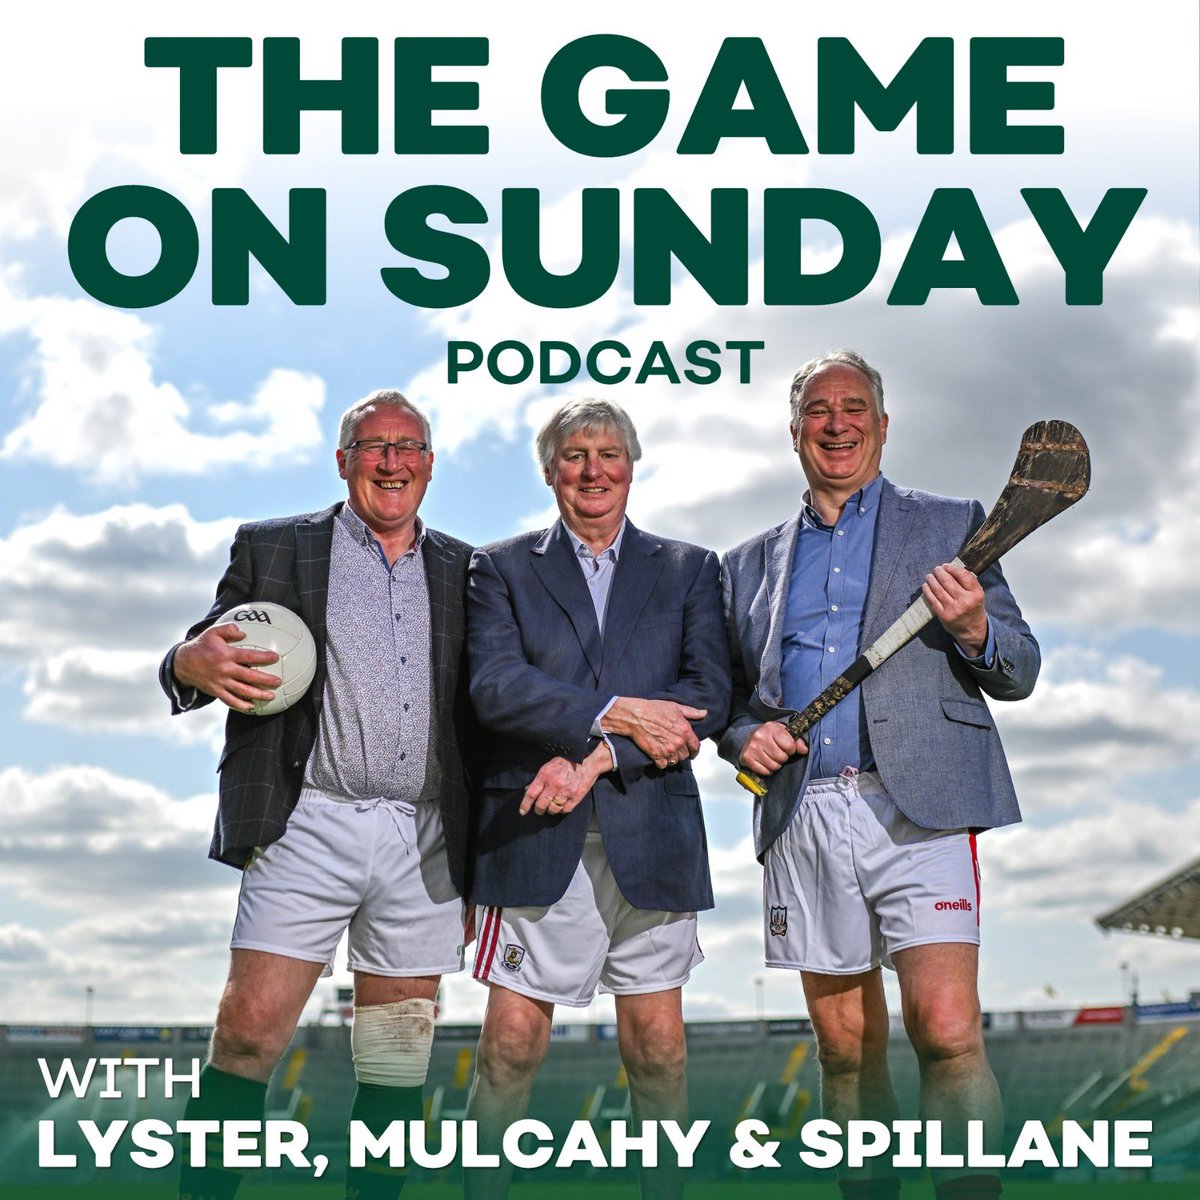 The boys are back in town. GAA legends announce new podcast.